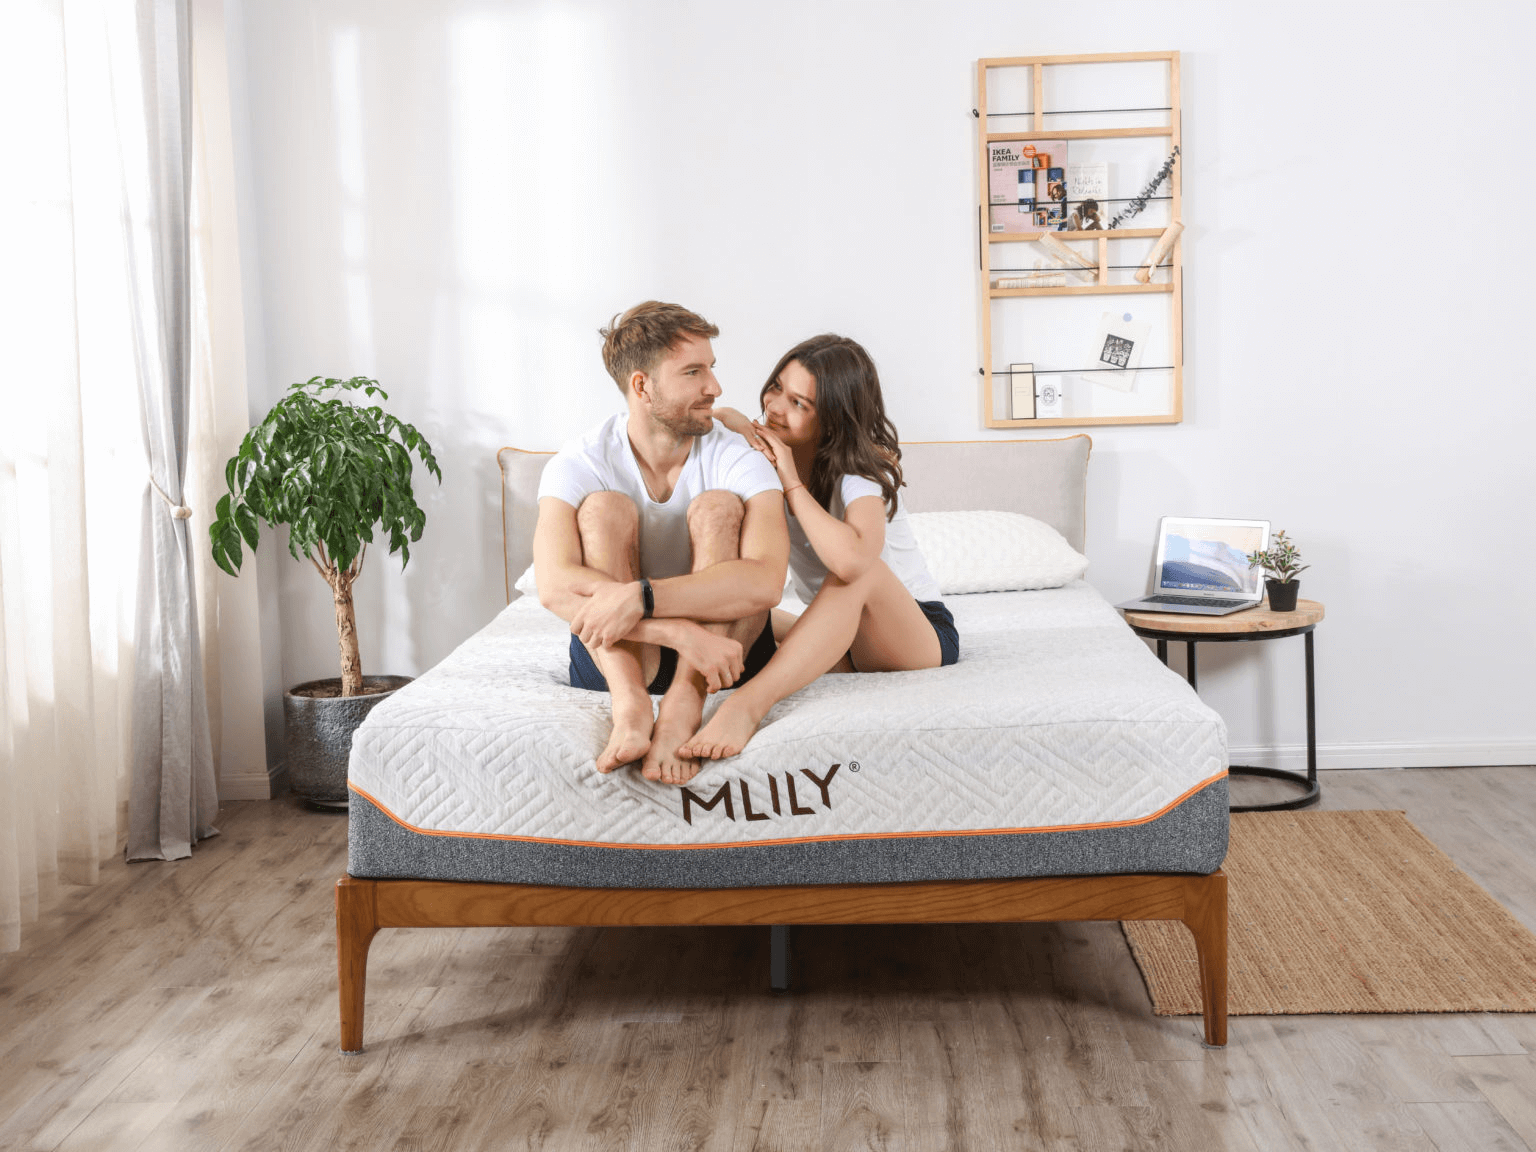 Whether you are heavy or lightweight, you can still find the right mattress at Mlily